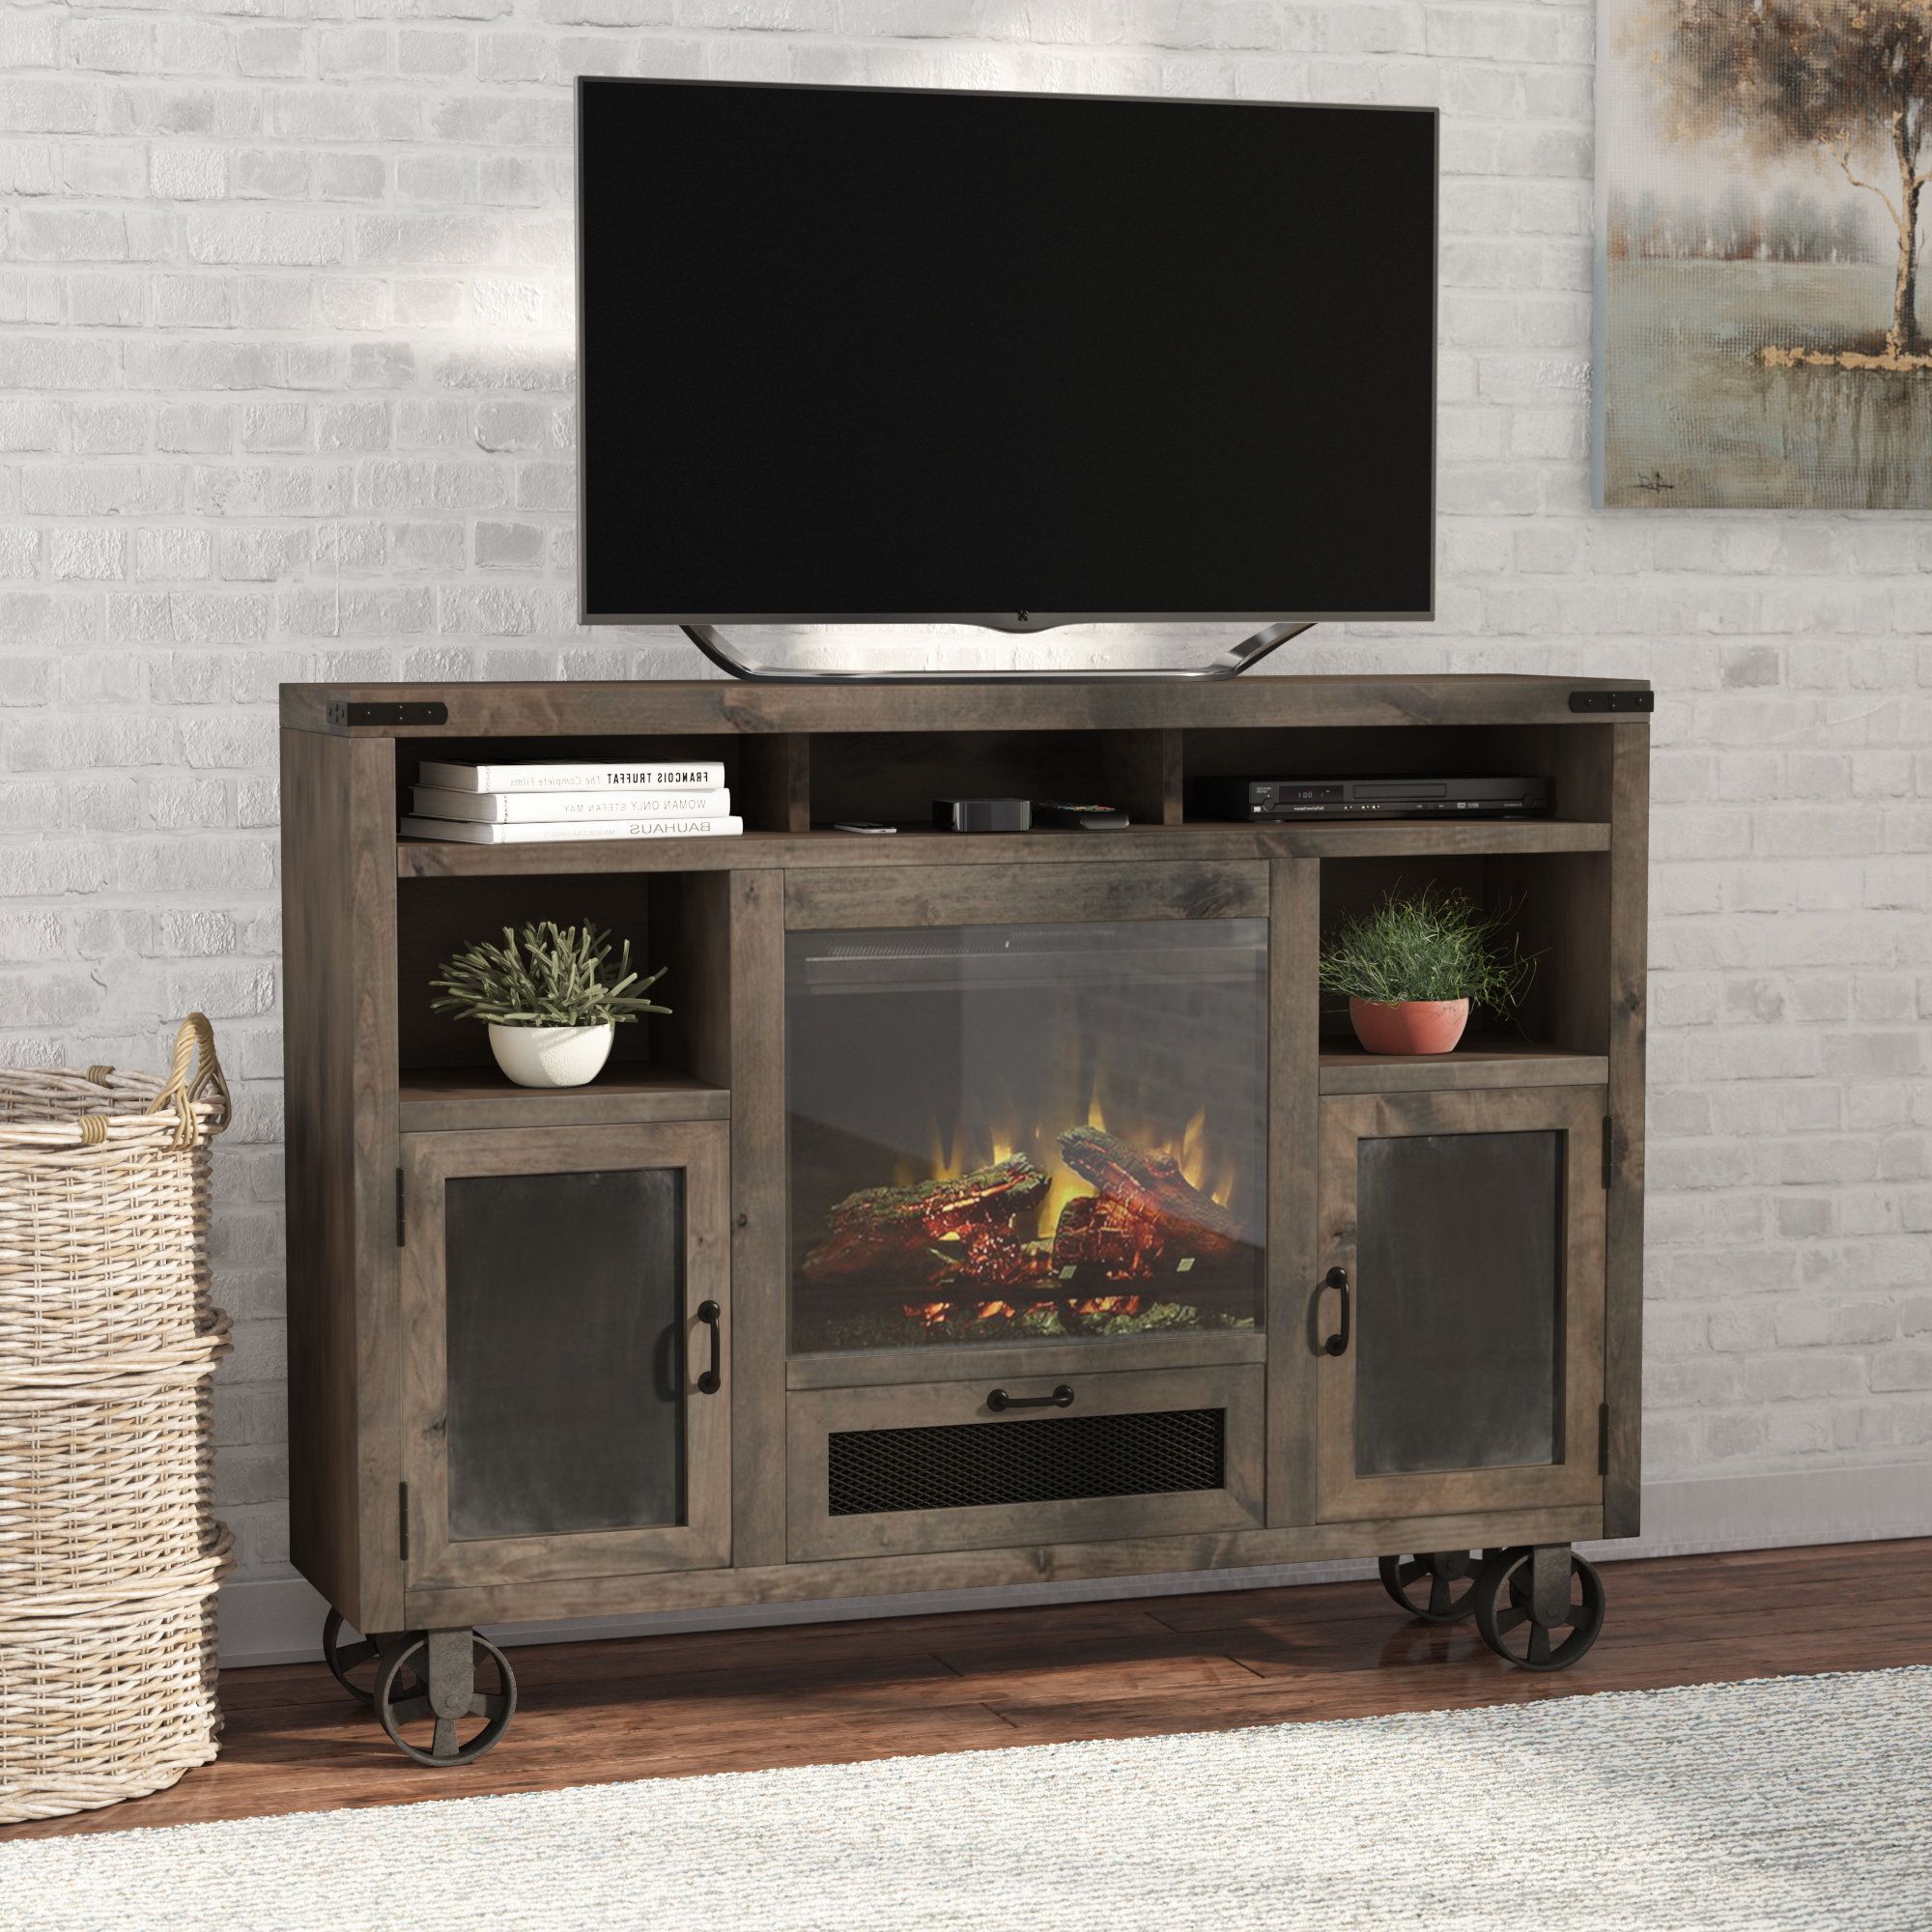 Tall Tv Stands You'll Love | Wayfair Intended For Edwin Grey 64 Inch Tv Stands (View 4 of 20)